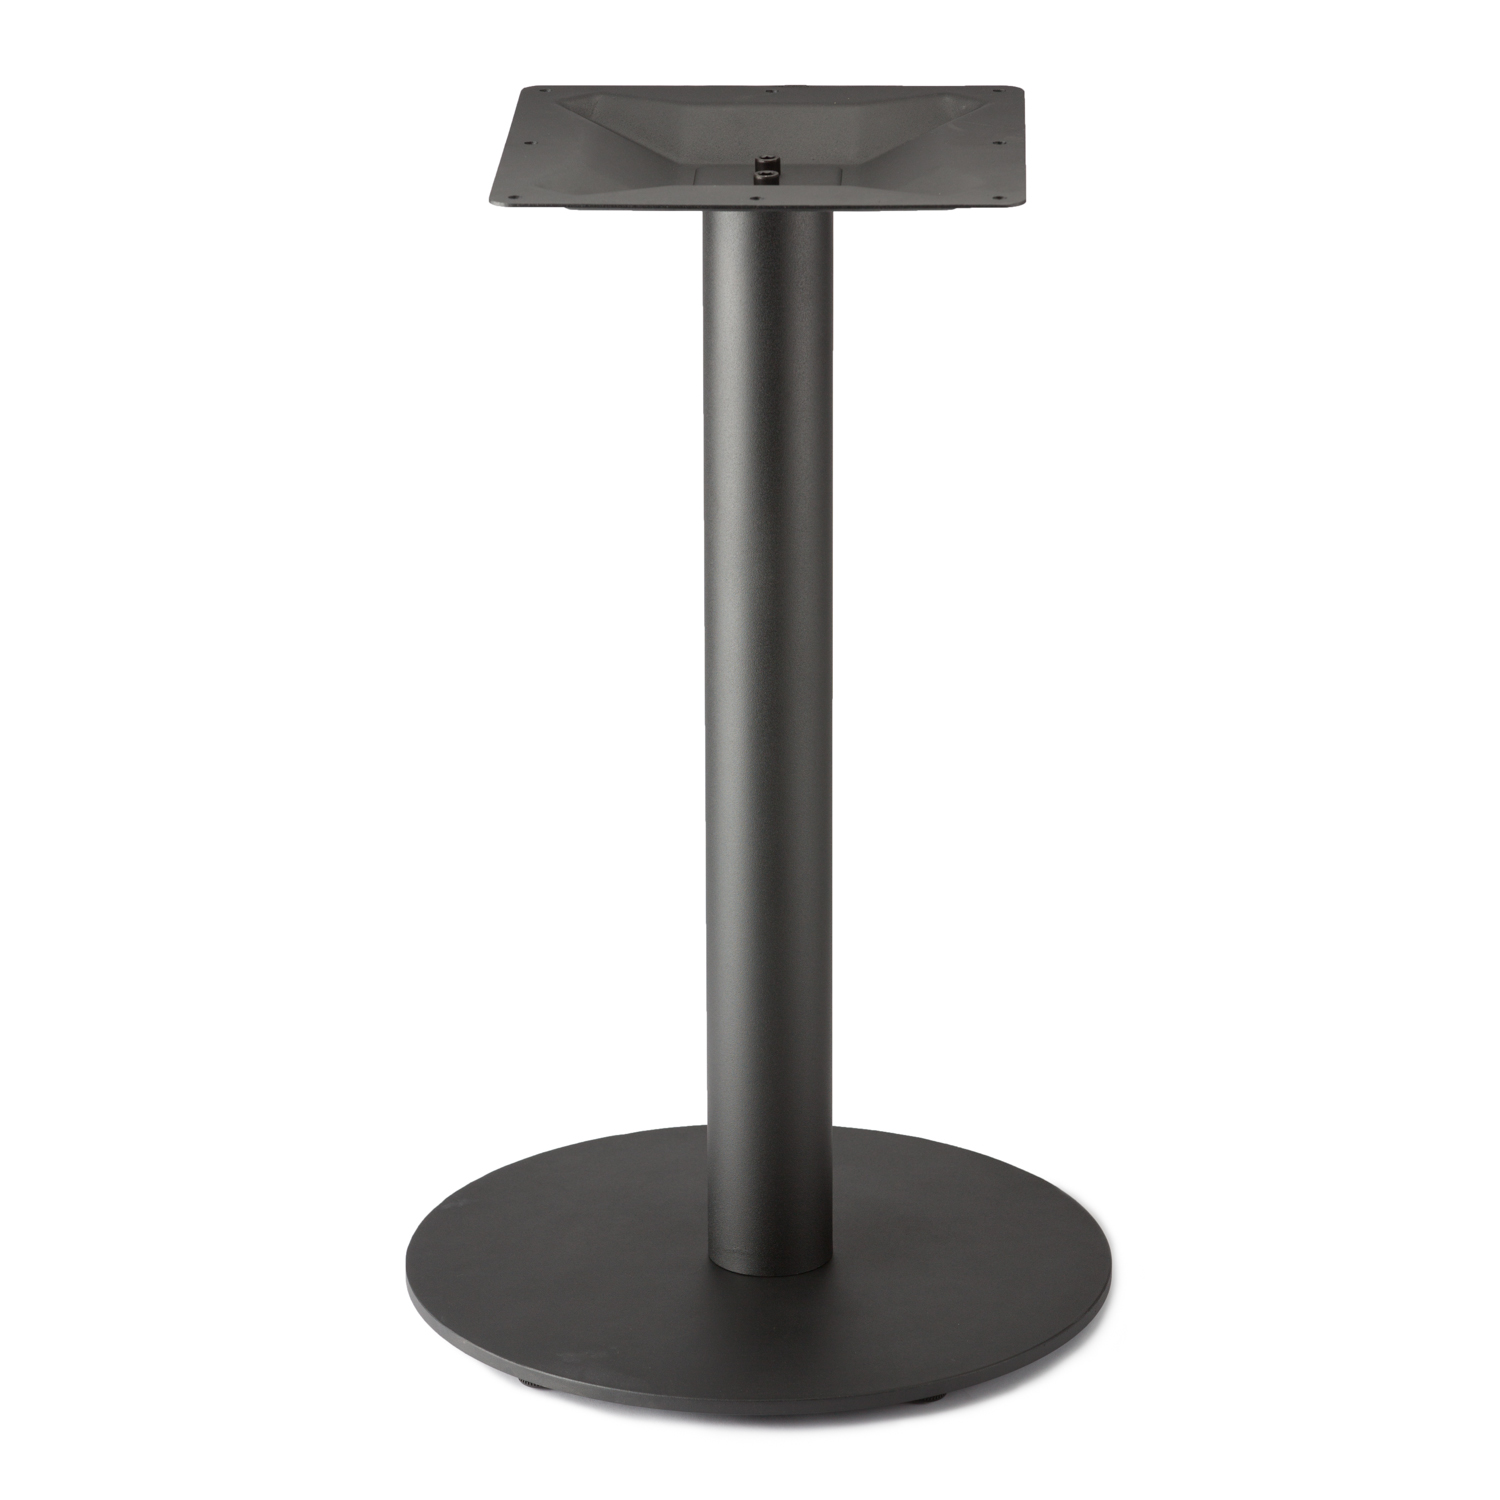 Turno Series Table Bases